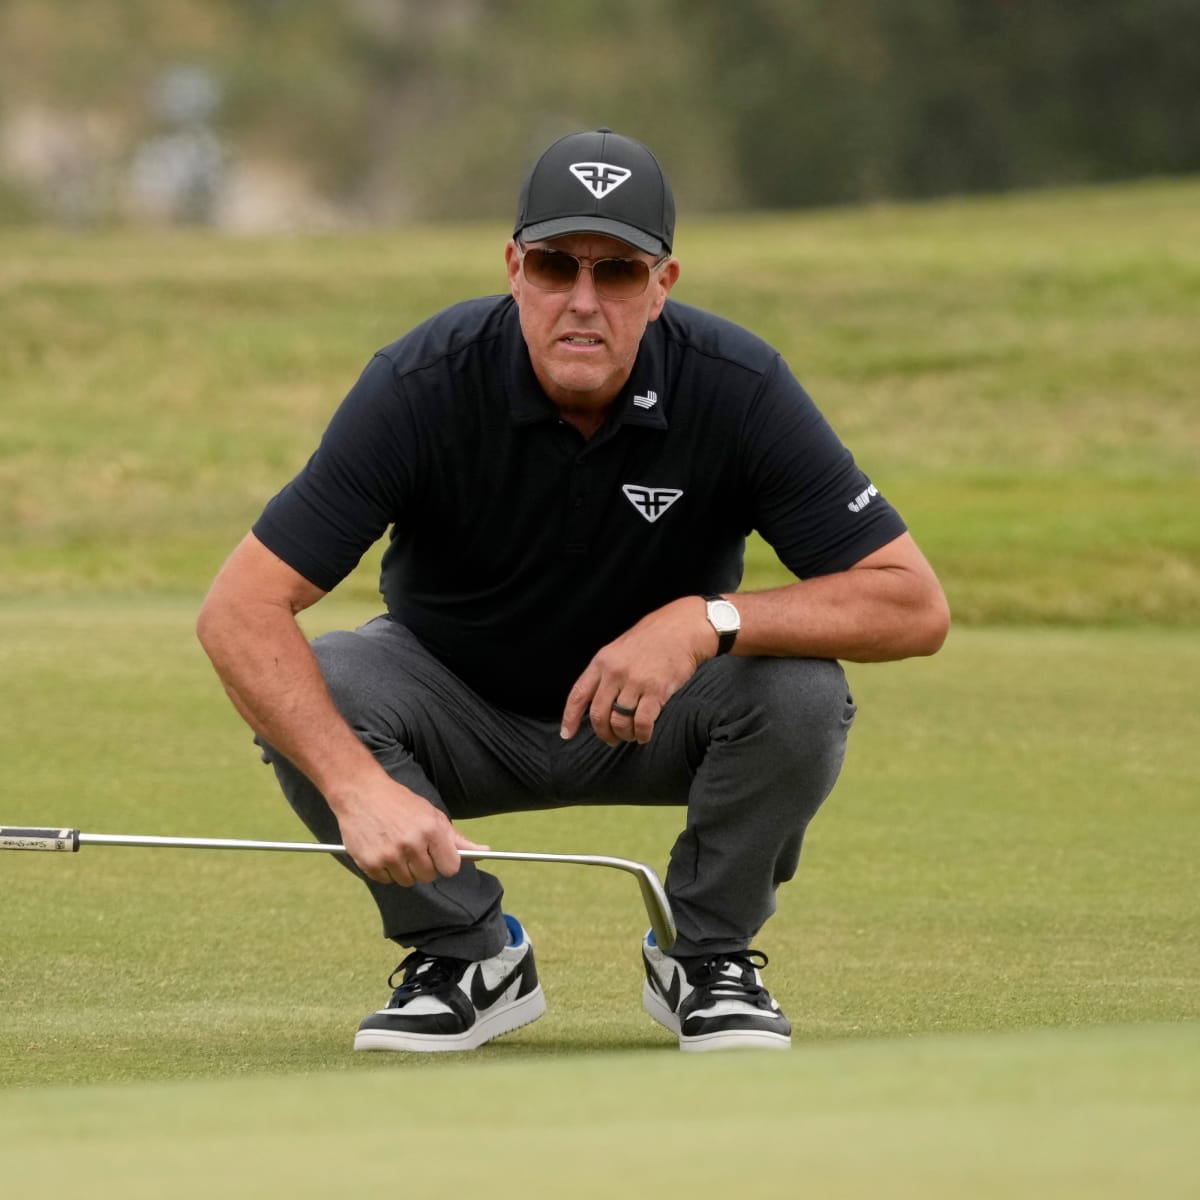 Phil Mickelson Wore Travis Scott x Air Jordan Shoes - Sports Illustrated FanNation Kicks News, Analysis and More